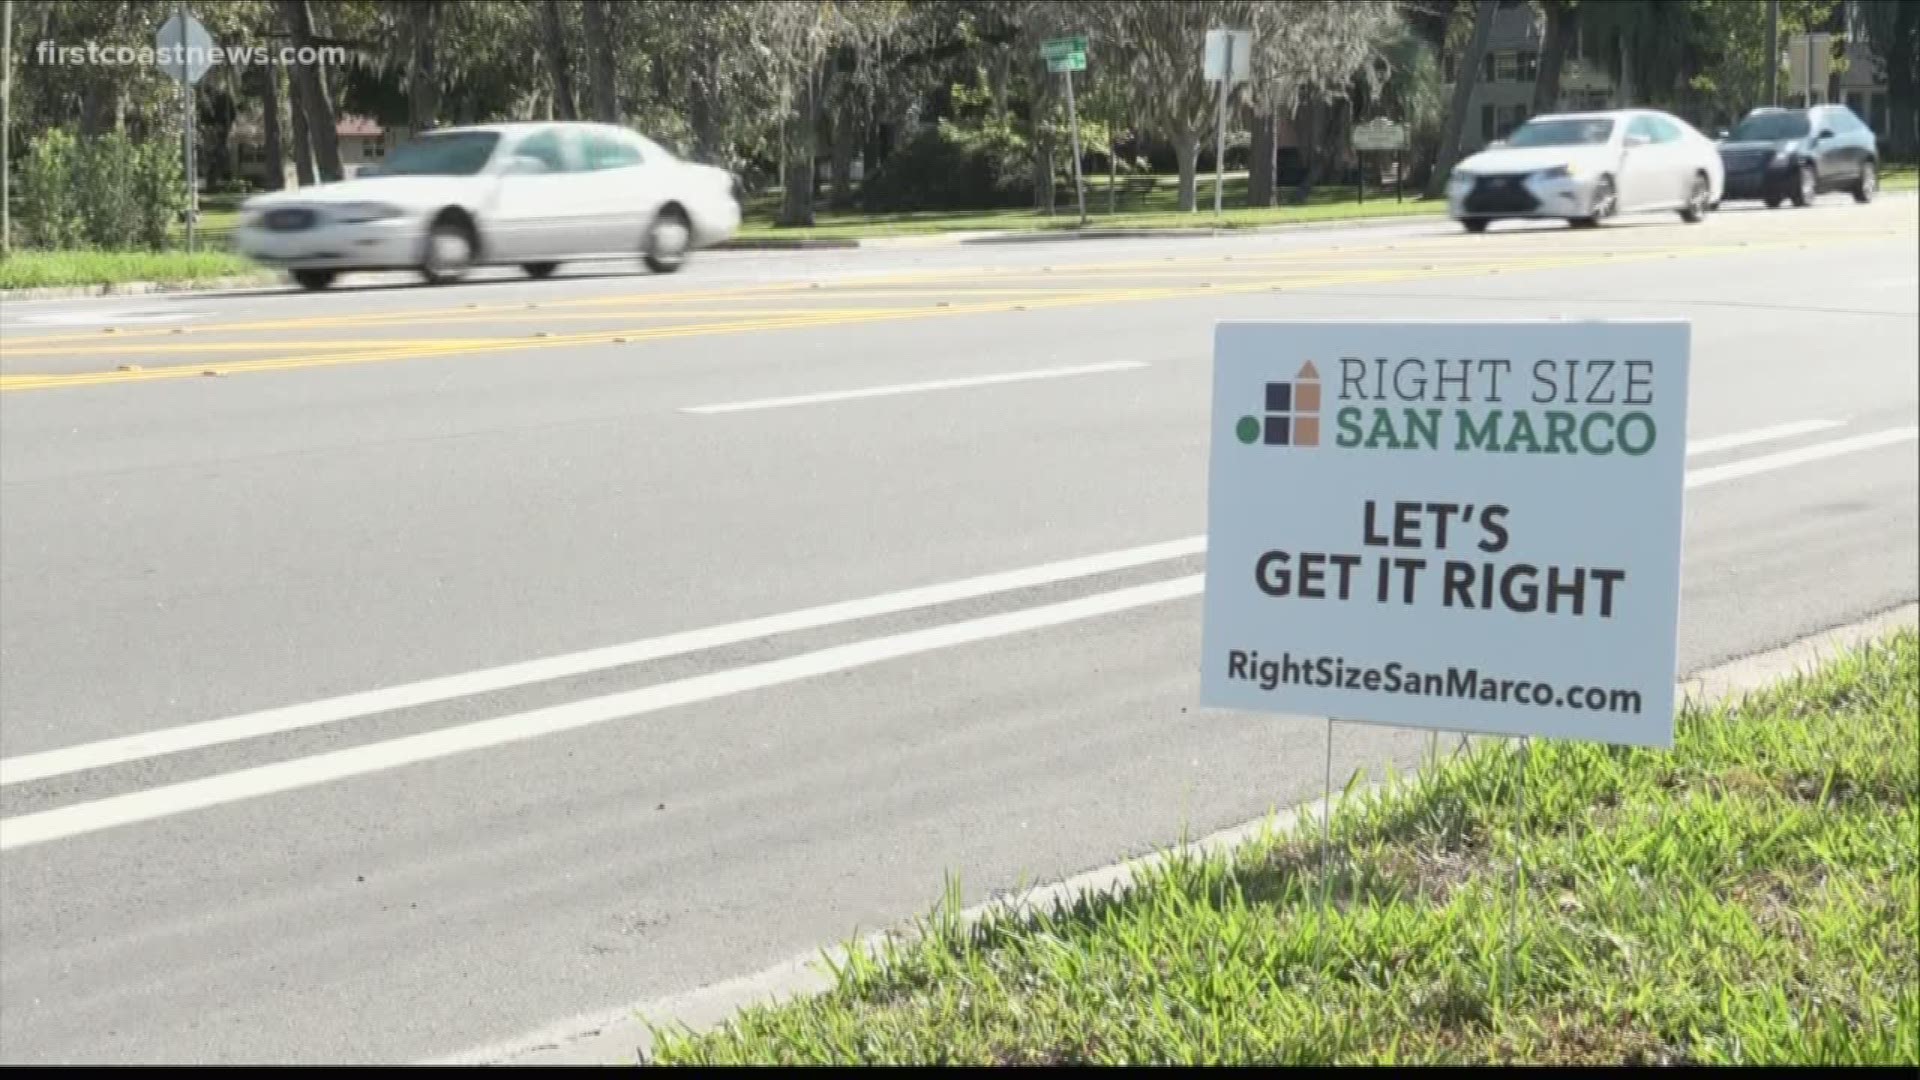 Residents in San Marco are pushing back against the large-scale construction project they say will ruin the neighborhood's charm.